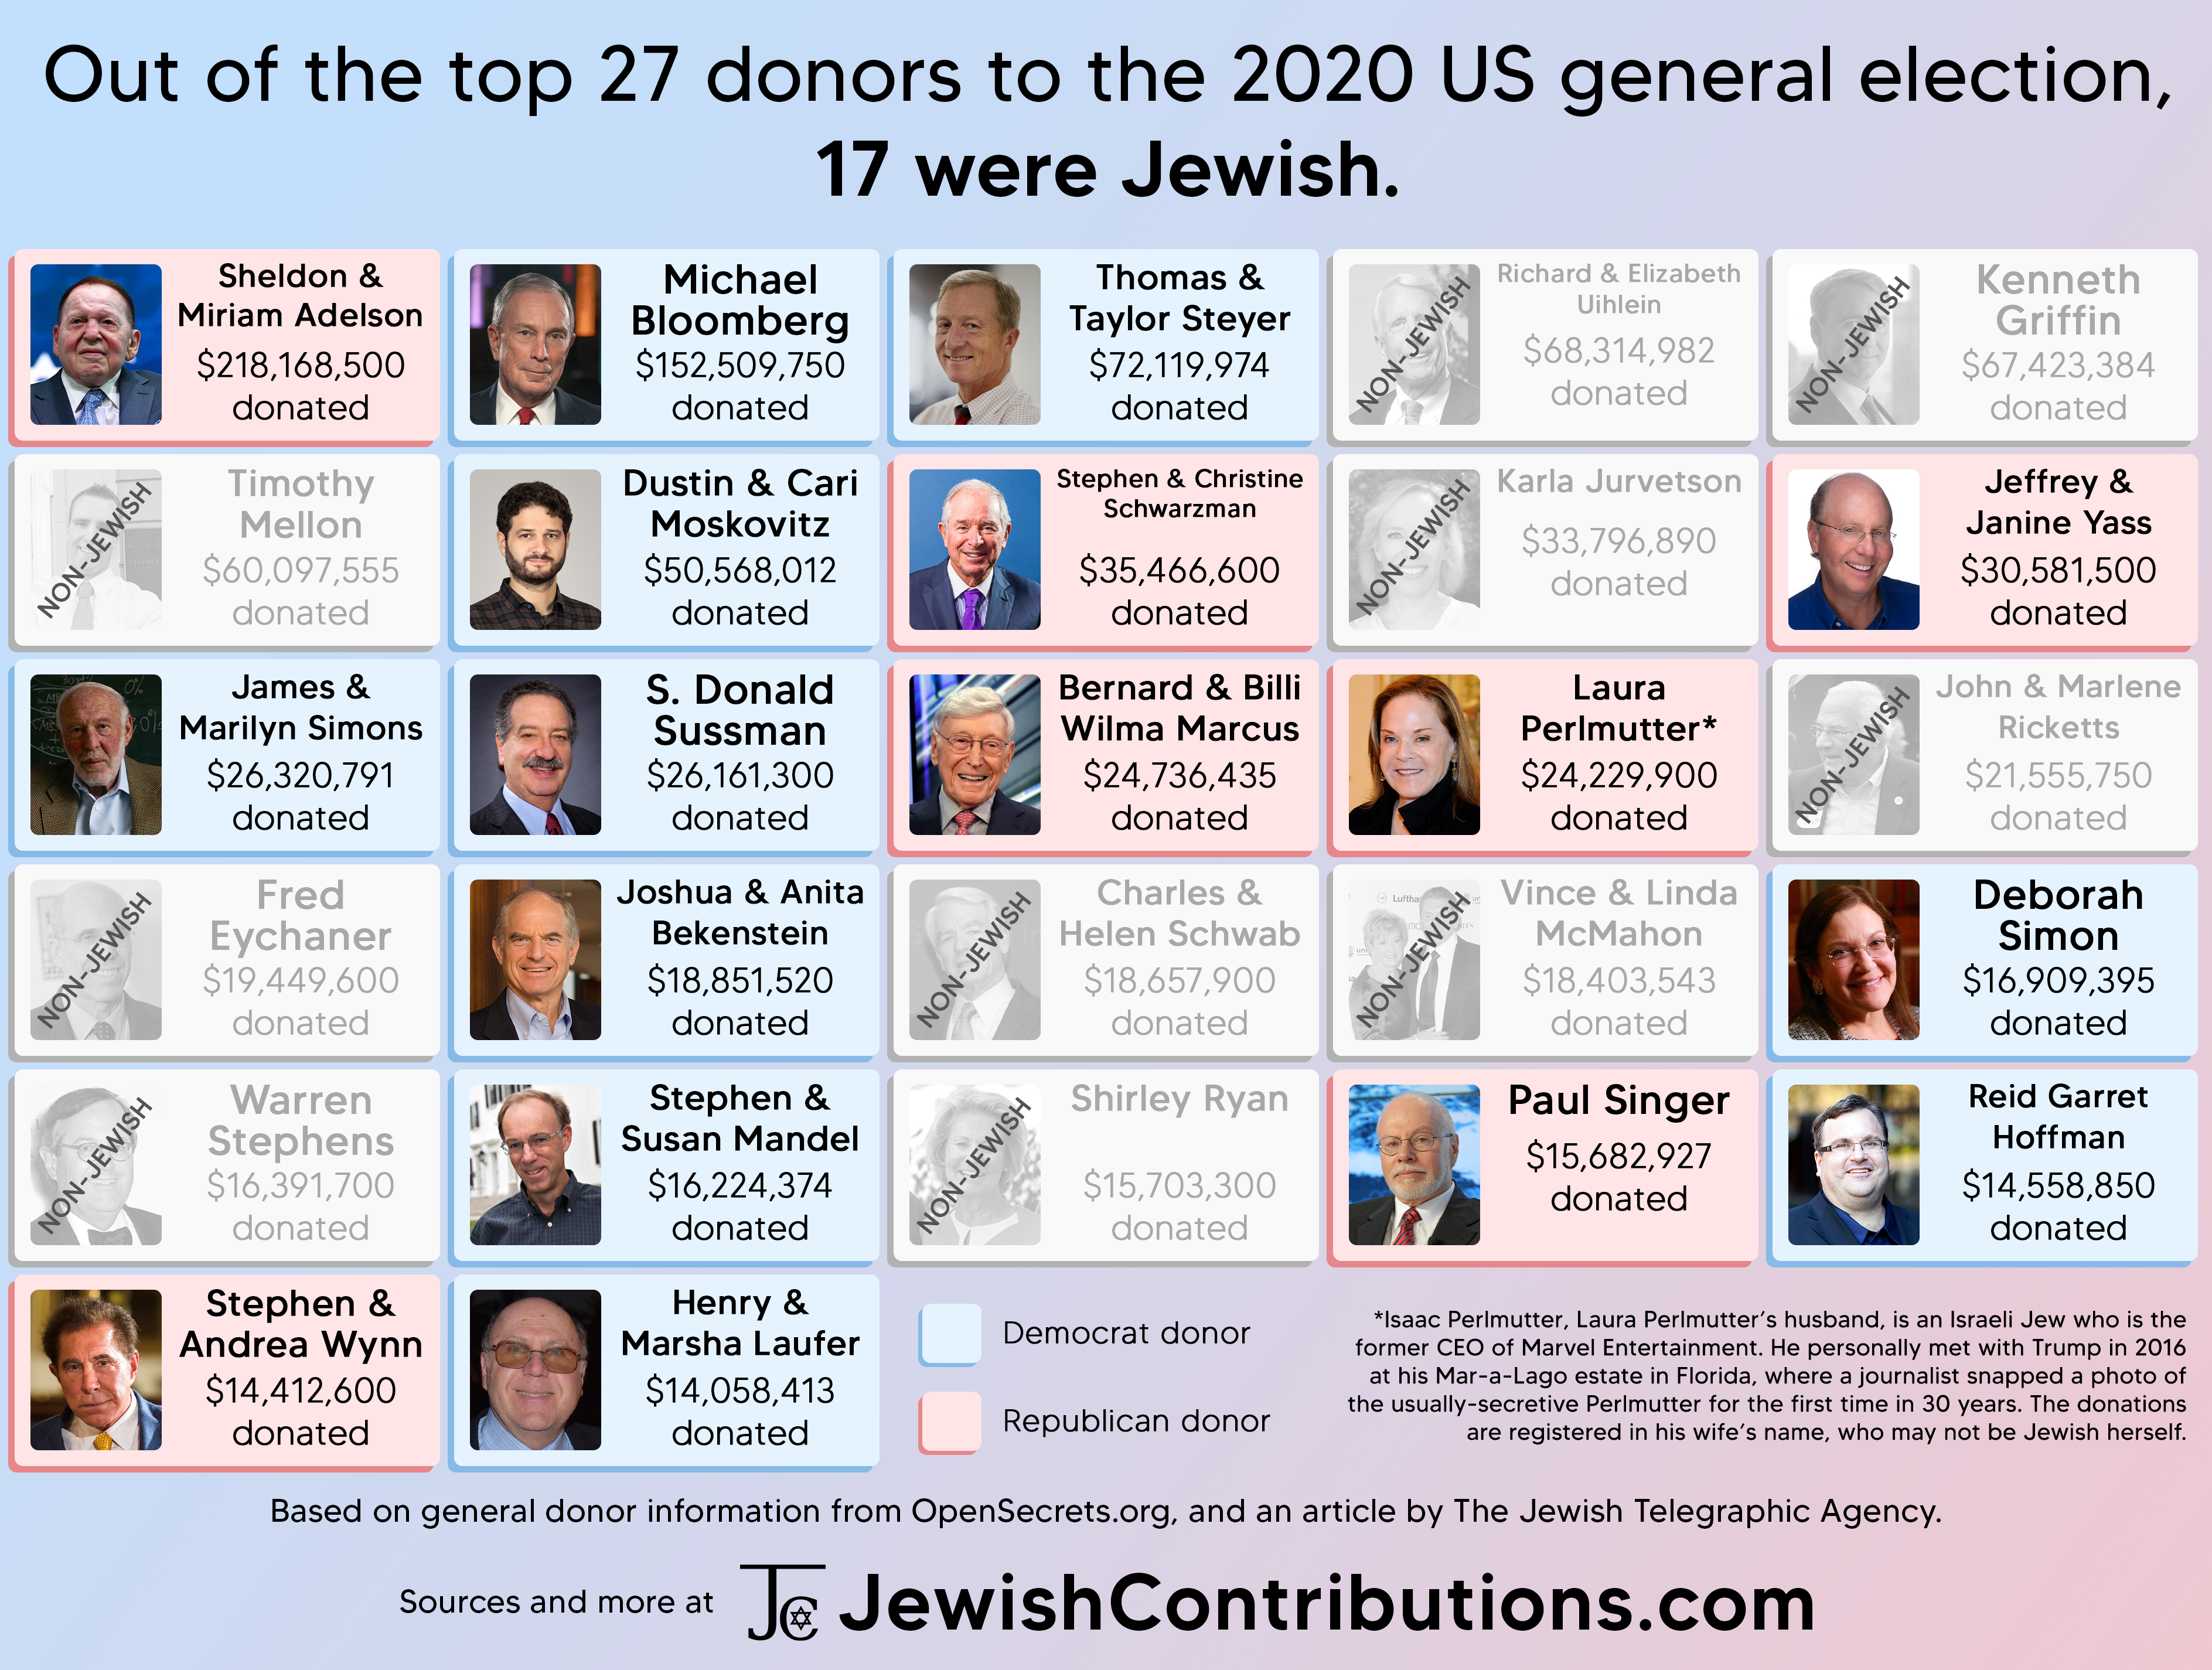 Out of the top 27 donors to the 2020 US general election, 17 were Jewish.